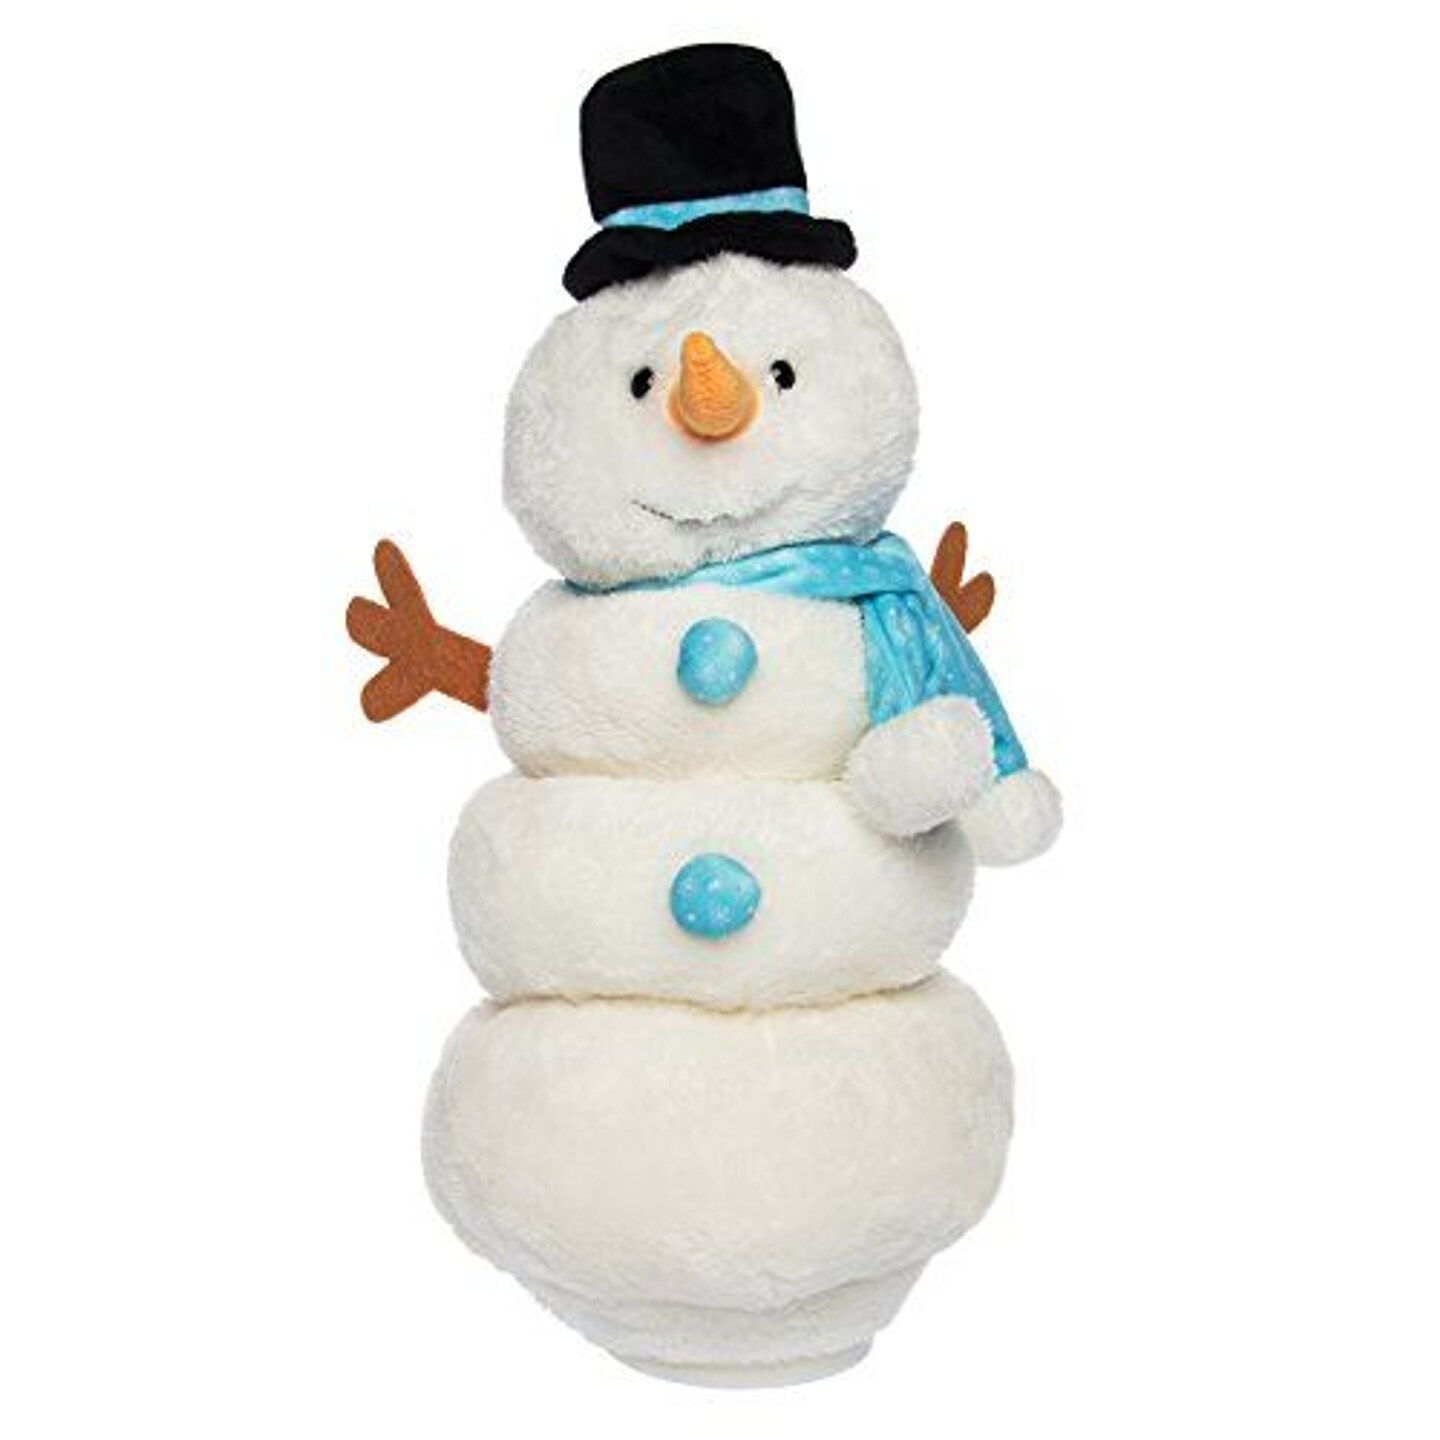 Simply Genius Animated Musical Plush Snowman: Animated Christmas Character, 15&#x201D; Stuffed Animal Plush Holiday Snowman with Music and Lights, Plays and Dances to &#x201C;Frosty the Snowman&#x201D;